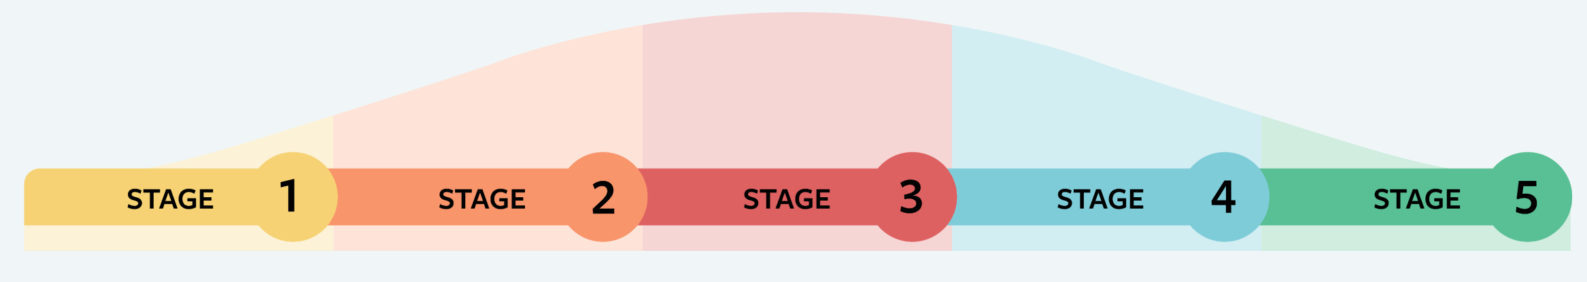 5 stages graphic